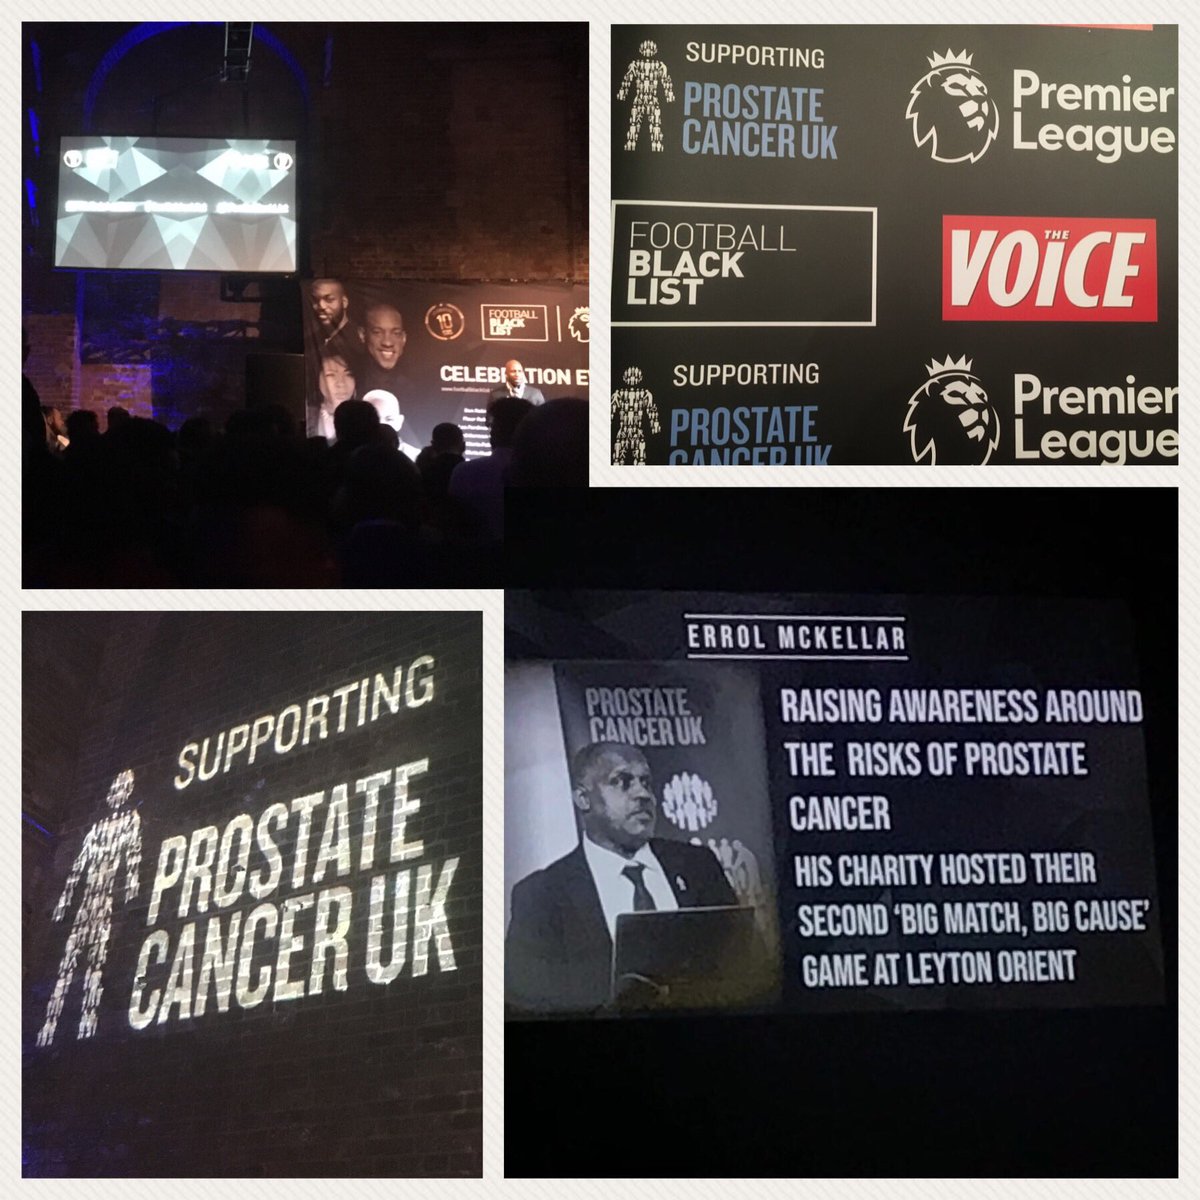 Huge thanks to @FootieBlackList for allowing @ProstateUK to salute tonight’s excellent #FBLCelebration. A night to recognise the class of 2018’s inspirational achievers, with plenty of conversations & crucial risk awareness raised.